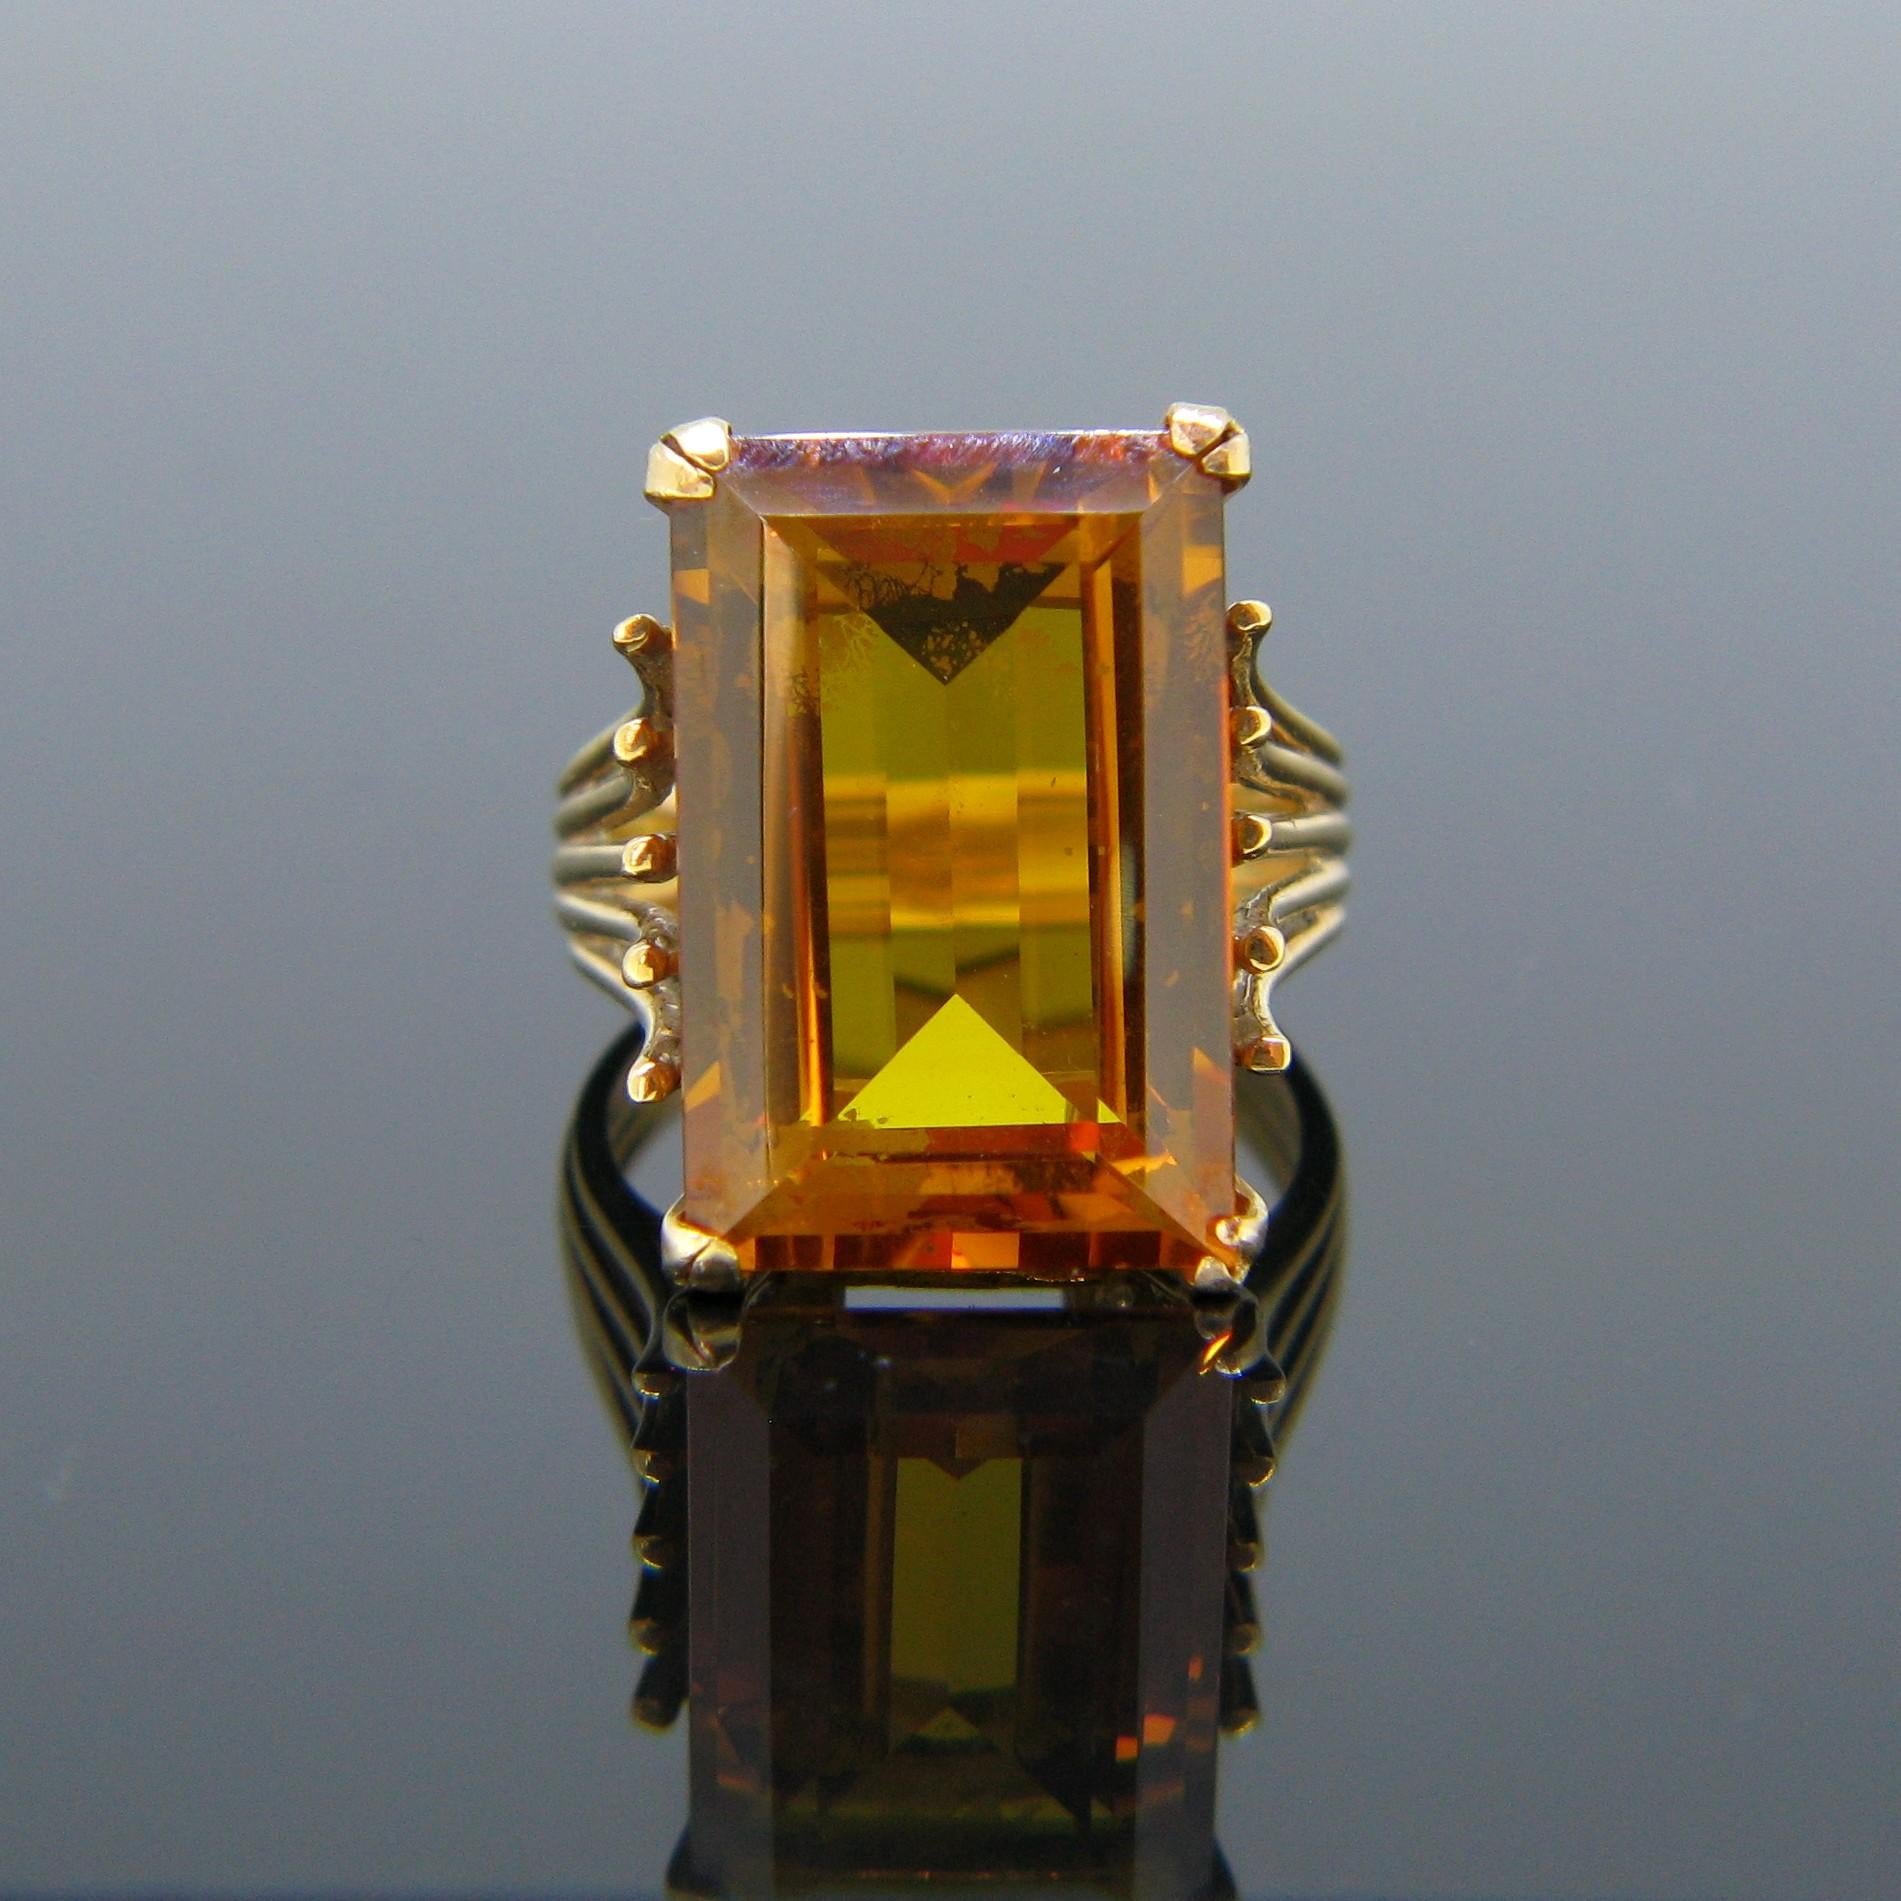 This French ring was made circa 1950 during the Retro years. It is fully made in 18kt yellow gold as it is marked with the eagle’s head.  It is set in the centre with a rectangular cut citrine with a vibrant autumn orange colour weighing around